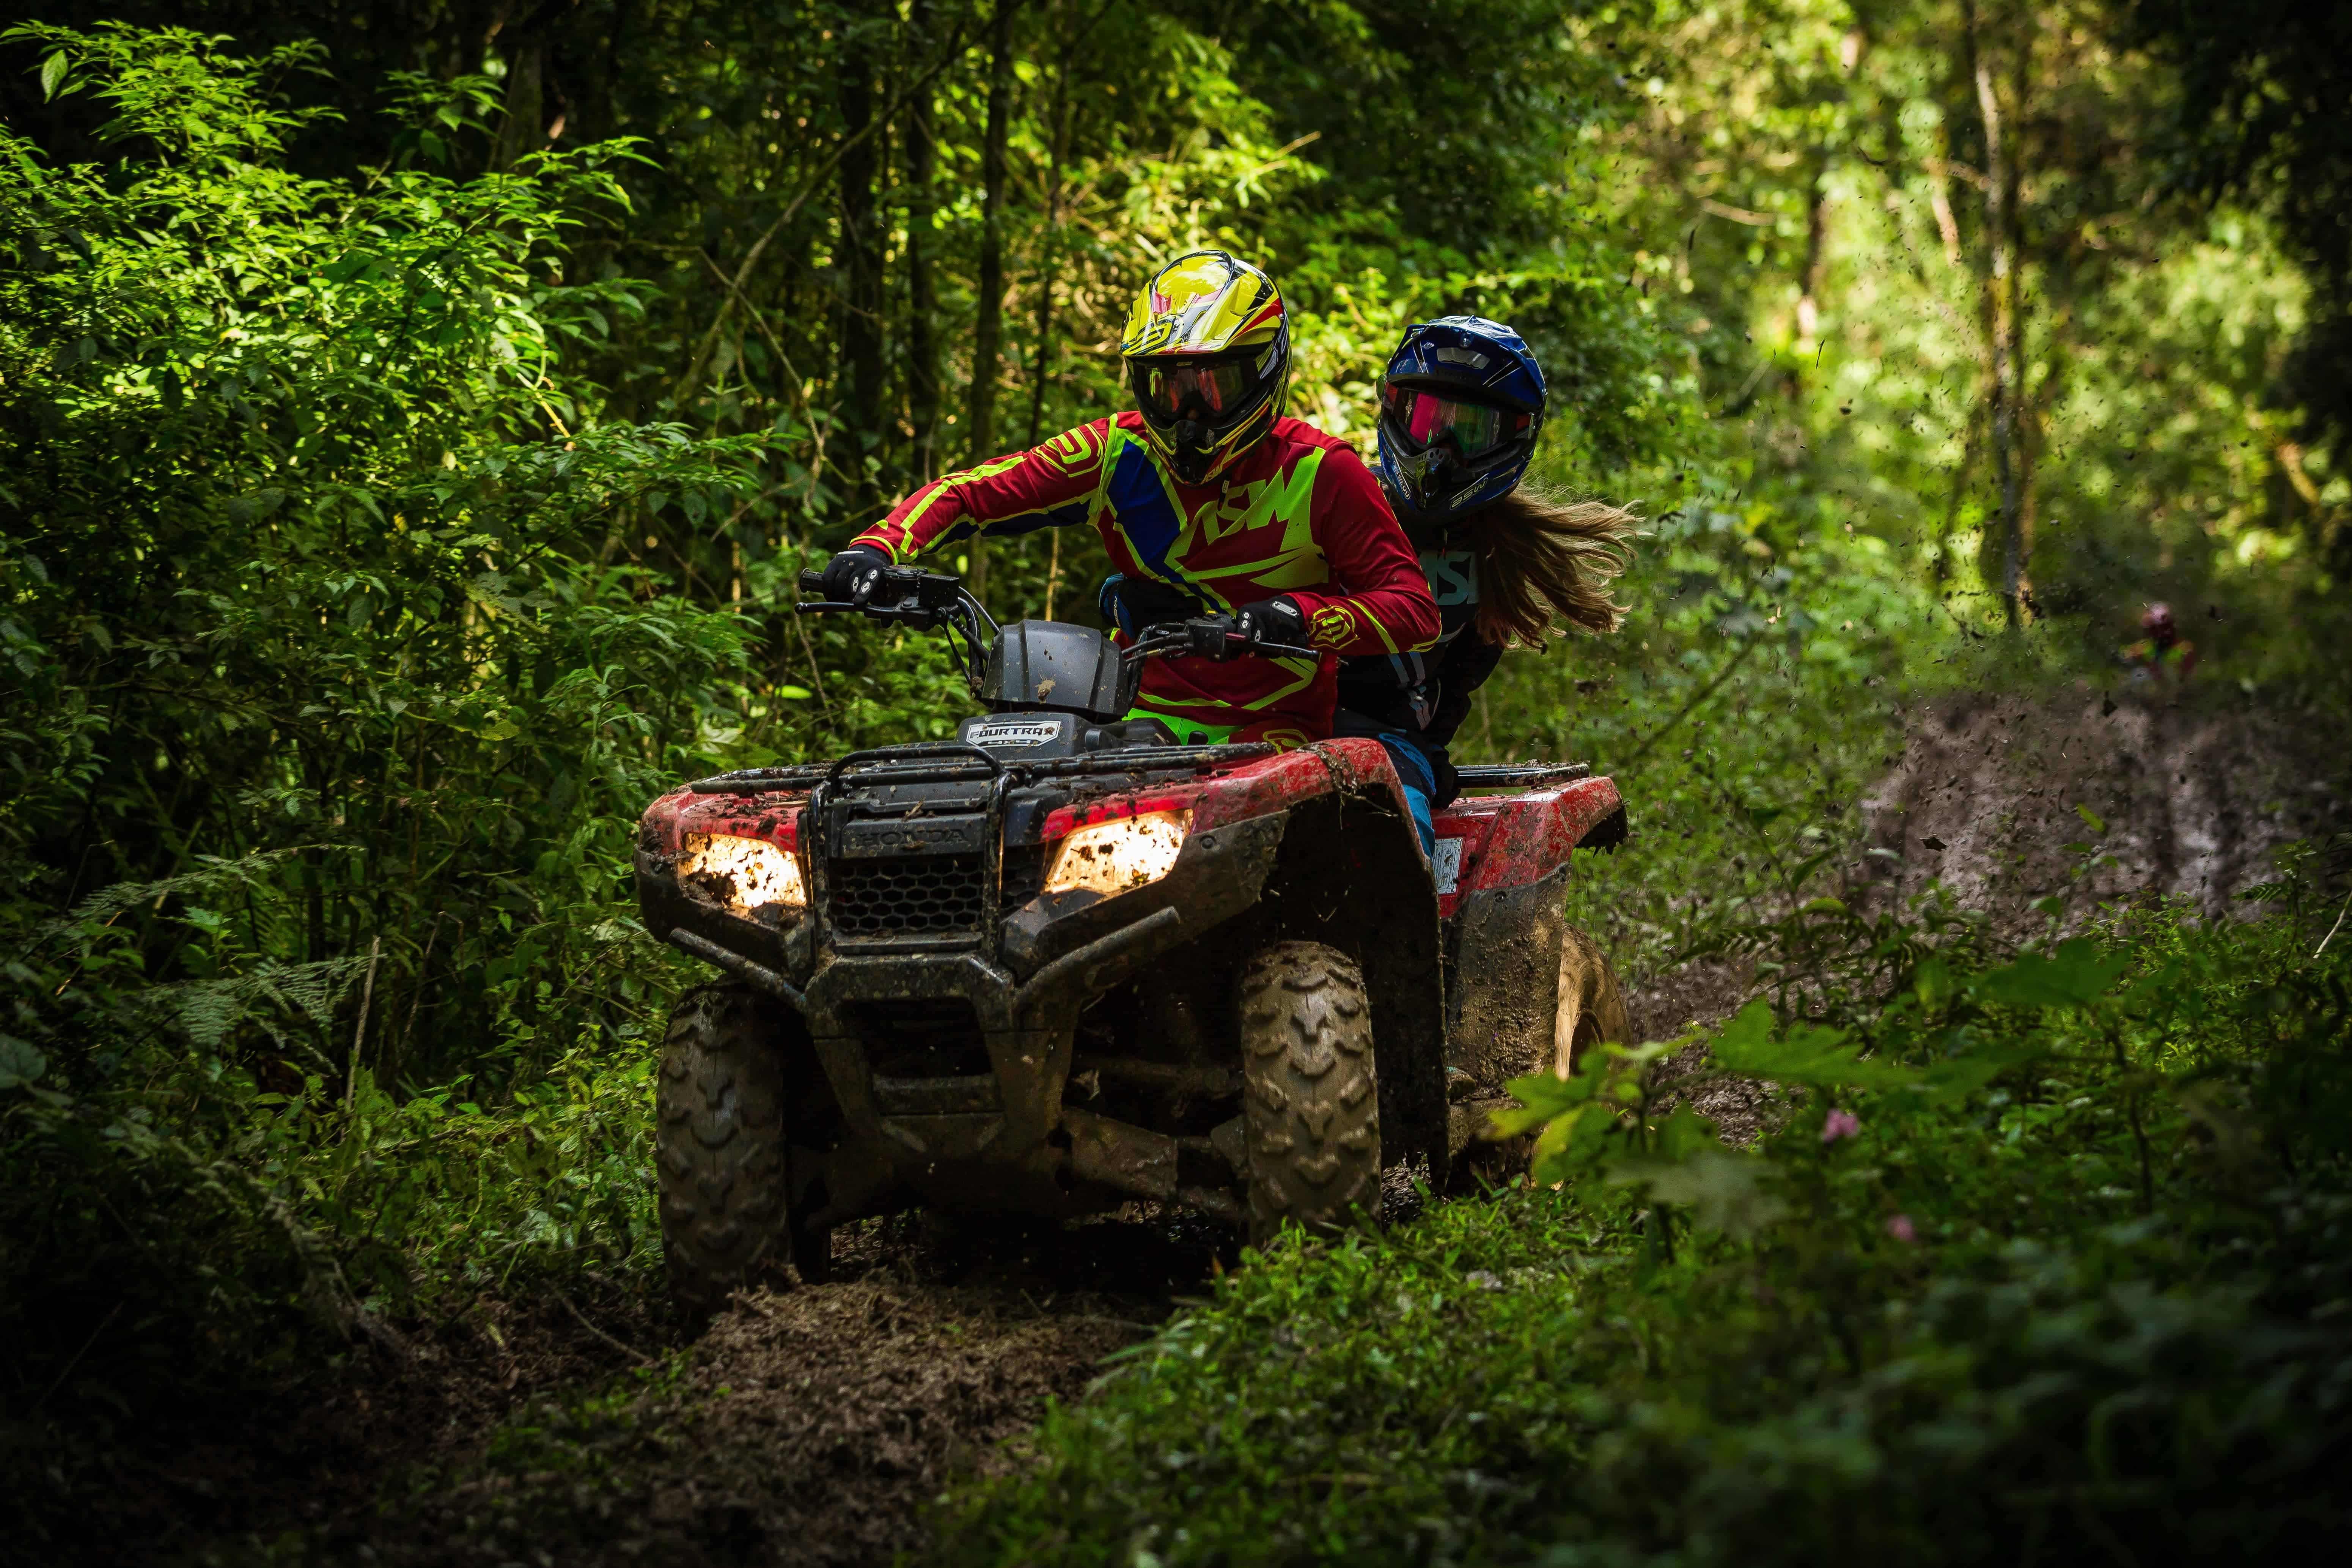 Man and woman riding on an ATV in the woods